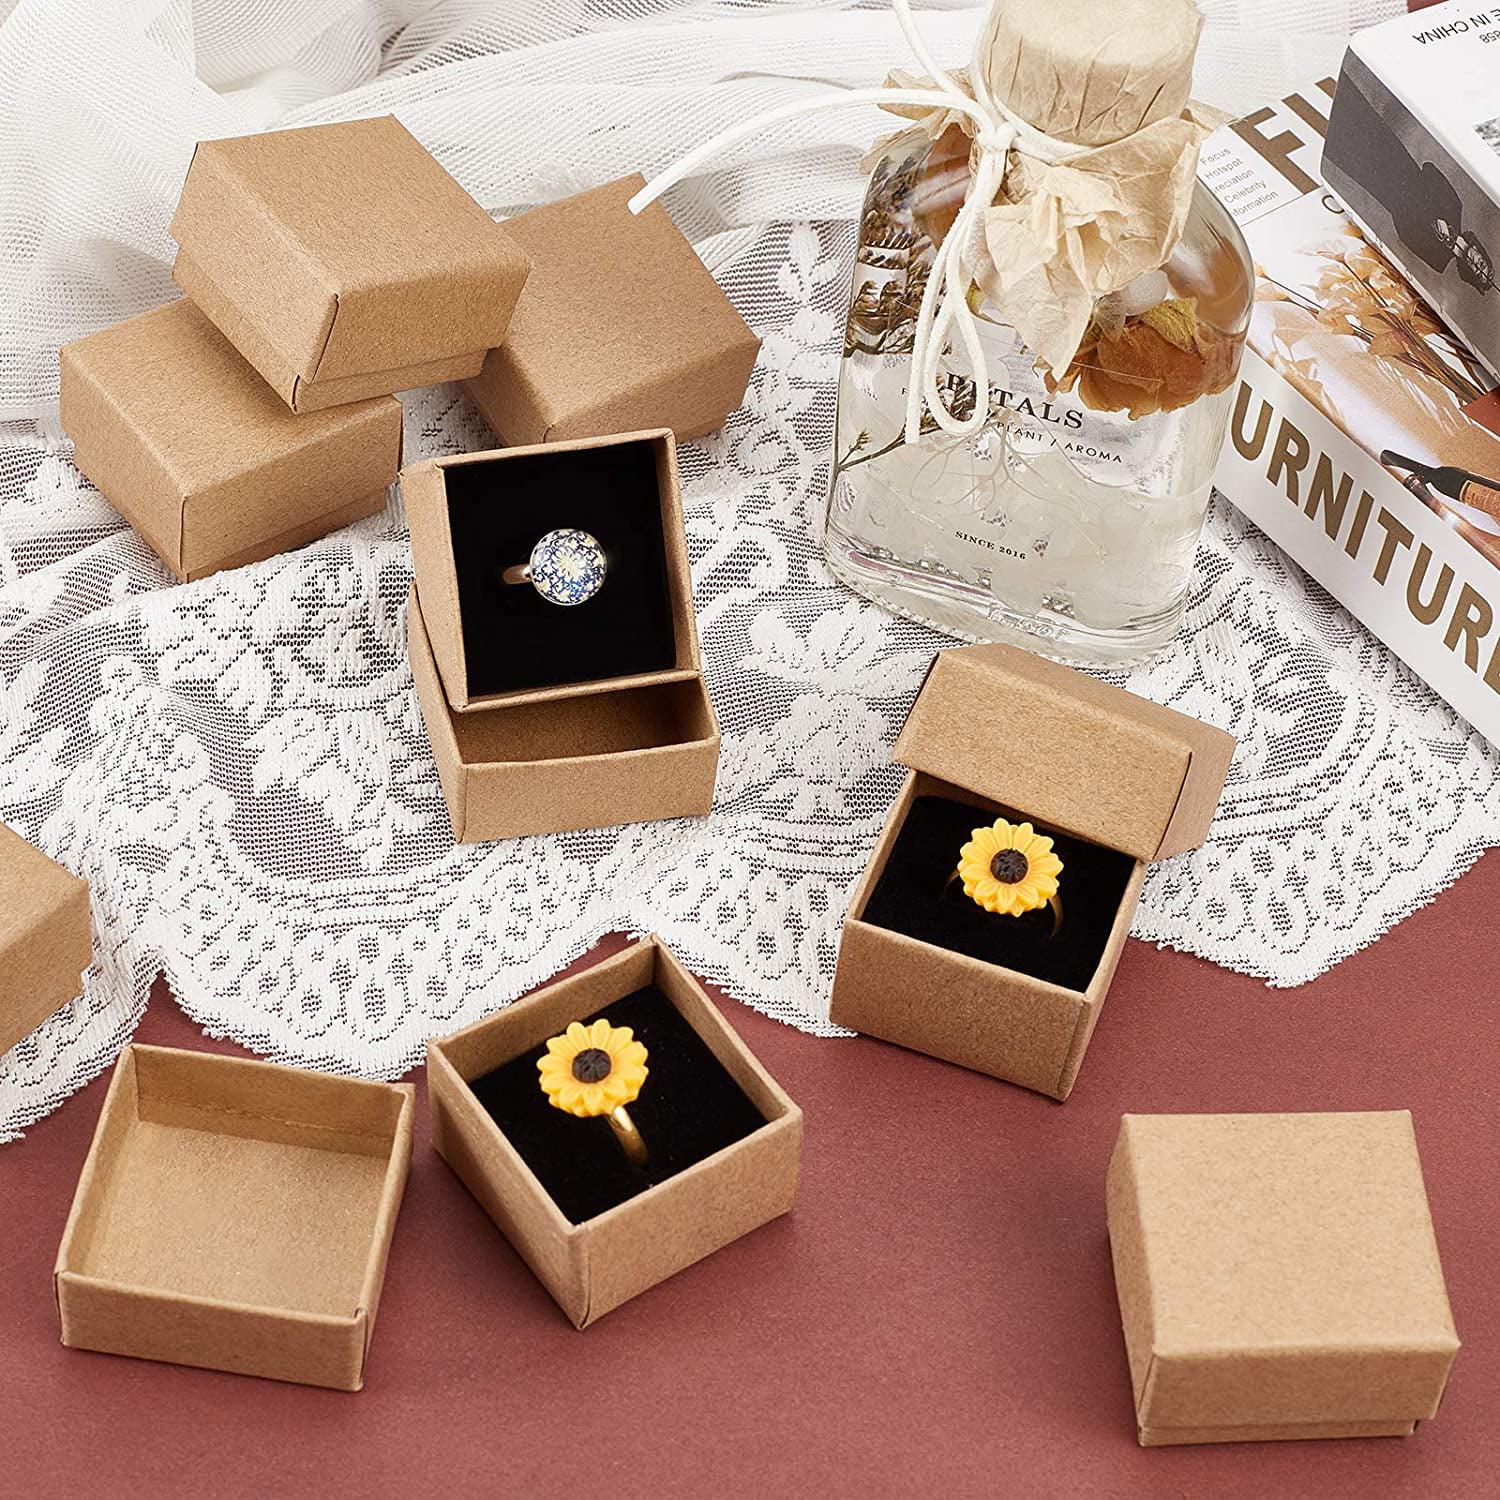 Prestige & Fancy Gold Jewelry Gift Boxes 50 pack, 2 x 1.75 x 1.12 Cardboard  Gift Boxes with Flocked Foam Ring and earring Slot, Small Jewelry Boxes